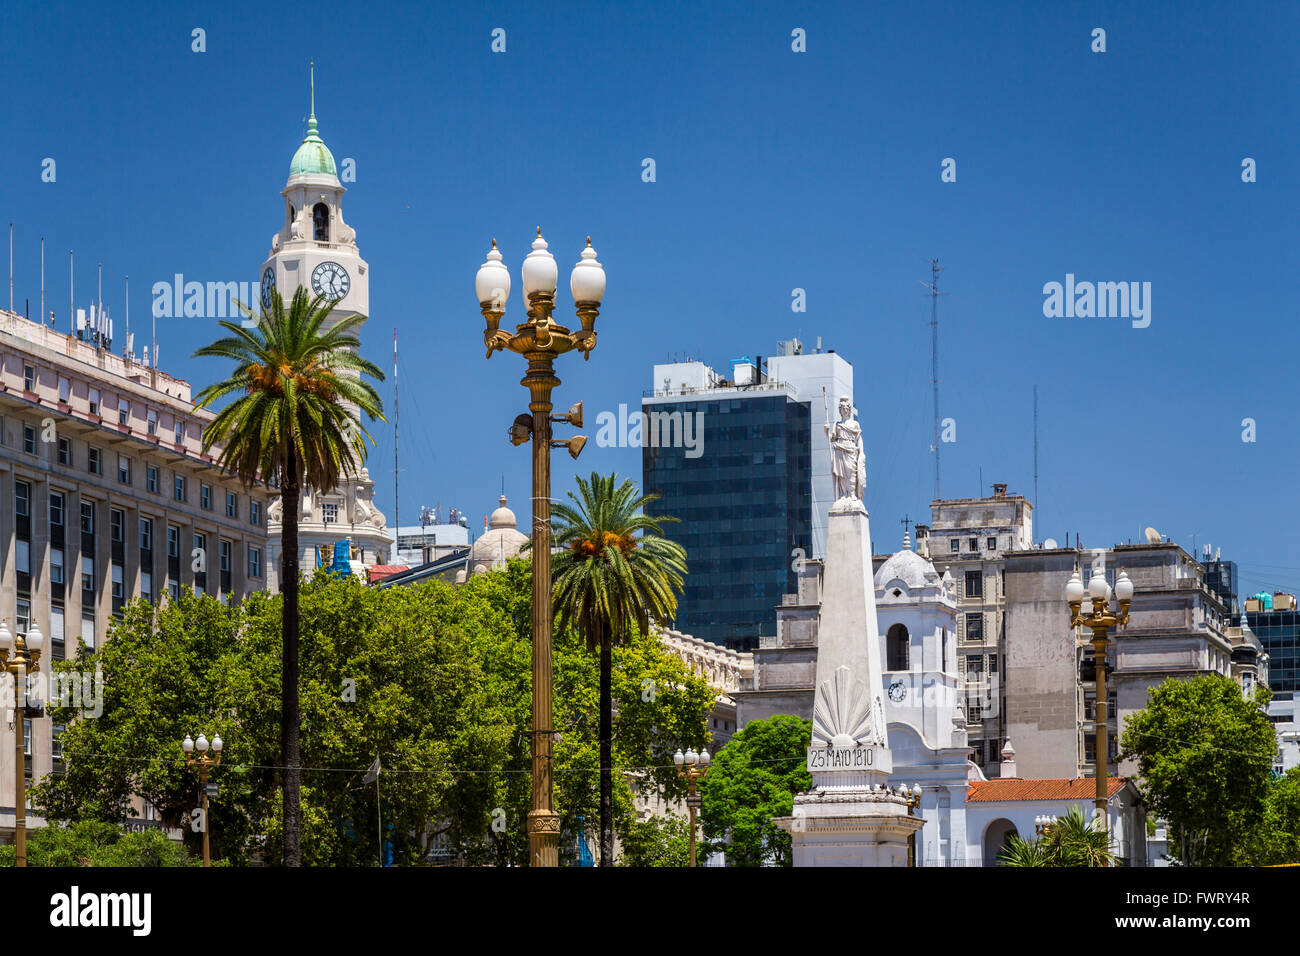 Architecture and monuments in Plaza de Mayo in Buenos Aires, Argentina, South America. Stock Photo